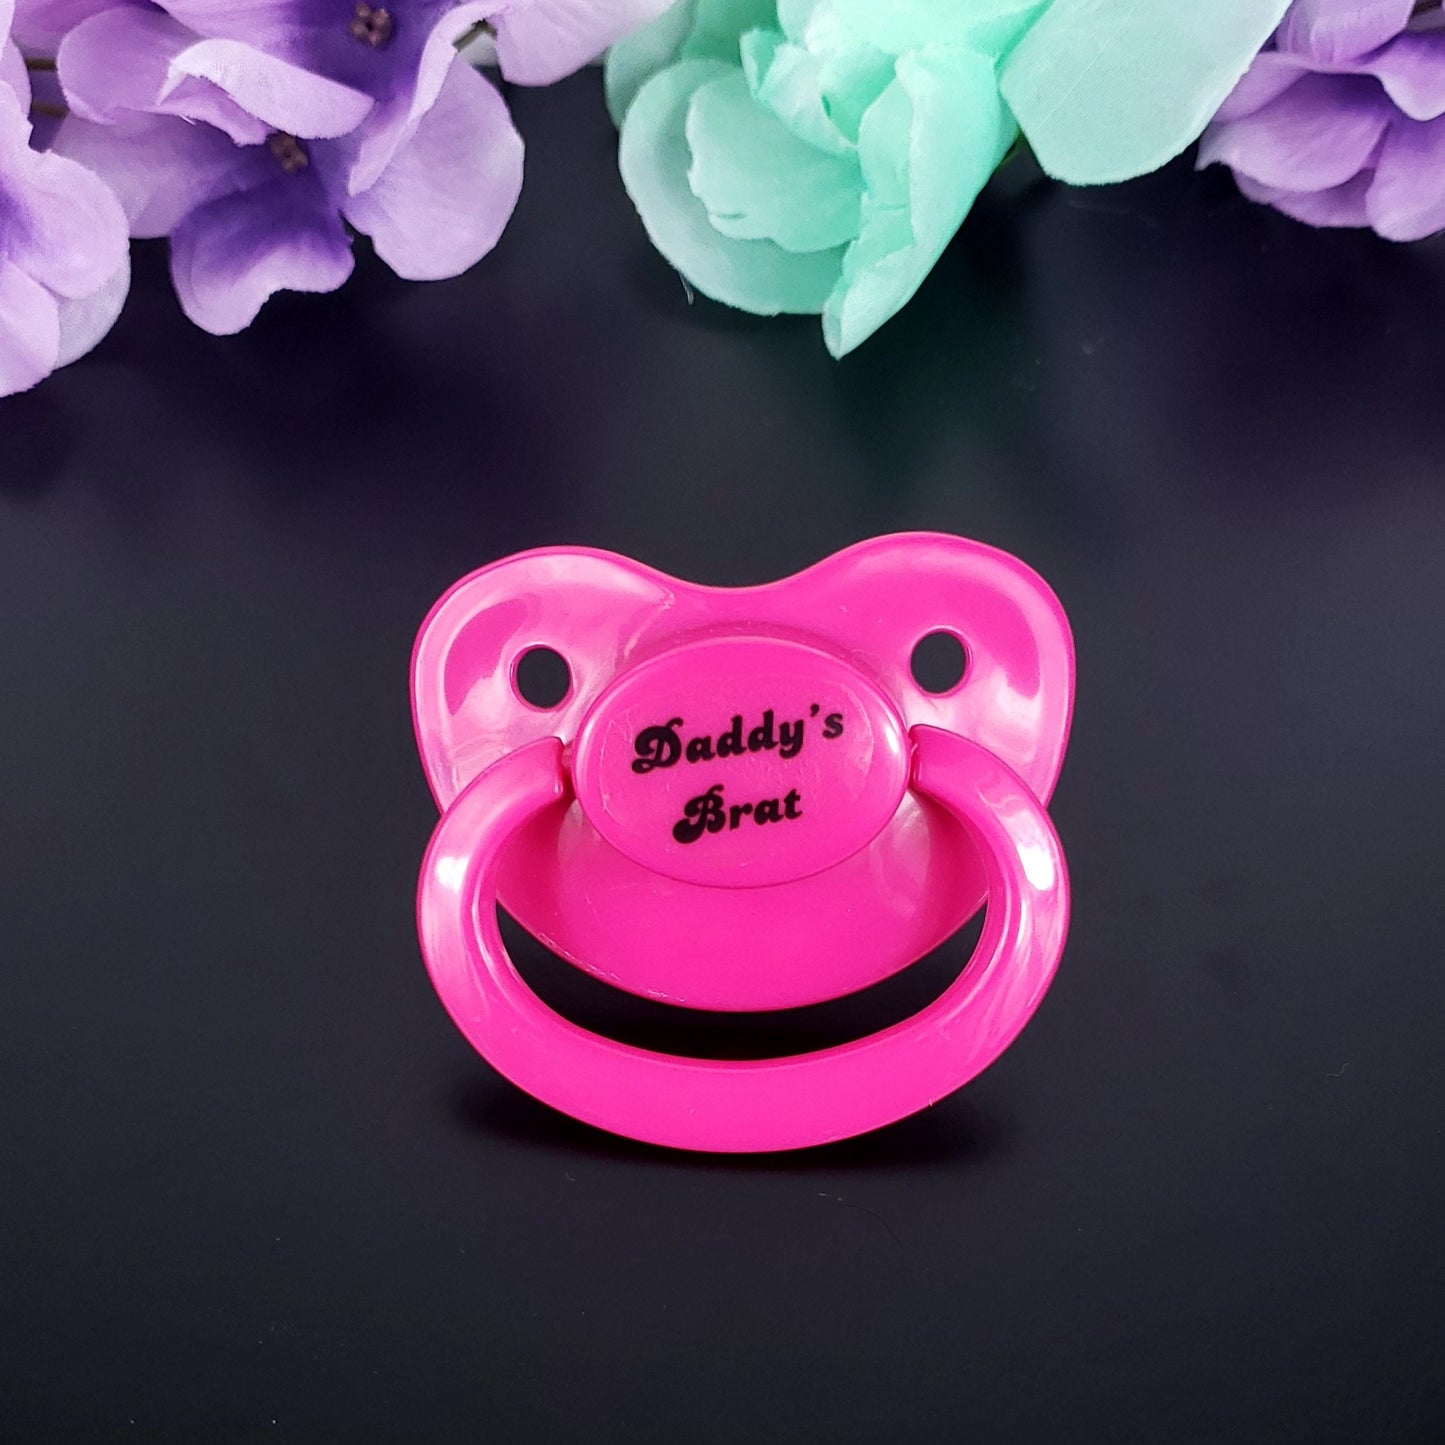 Daddy's Brat Adult Pacifier